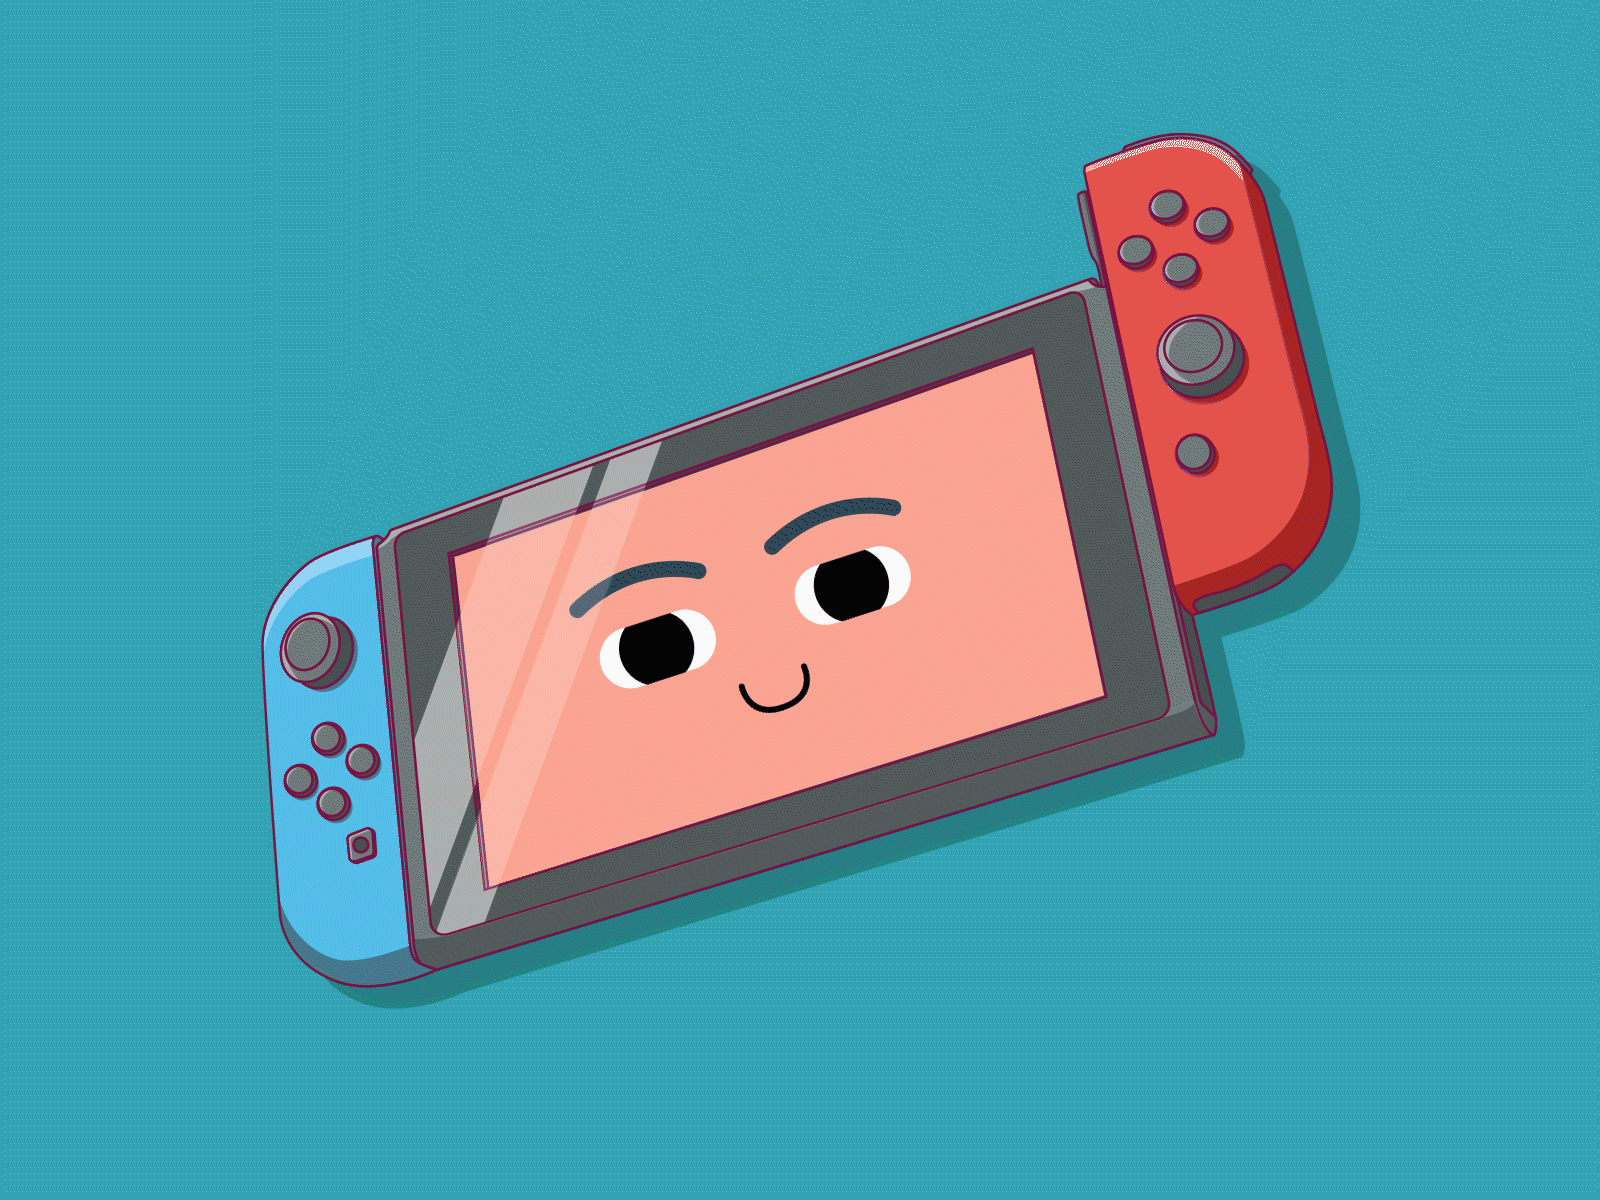 Nintendo Switch by Maxime Jacquot on Dribbble